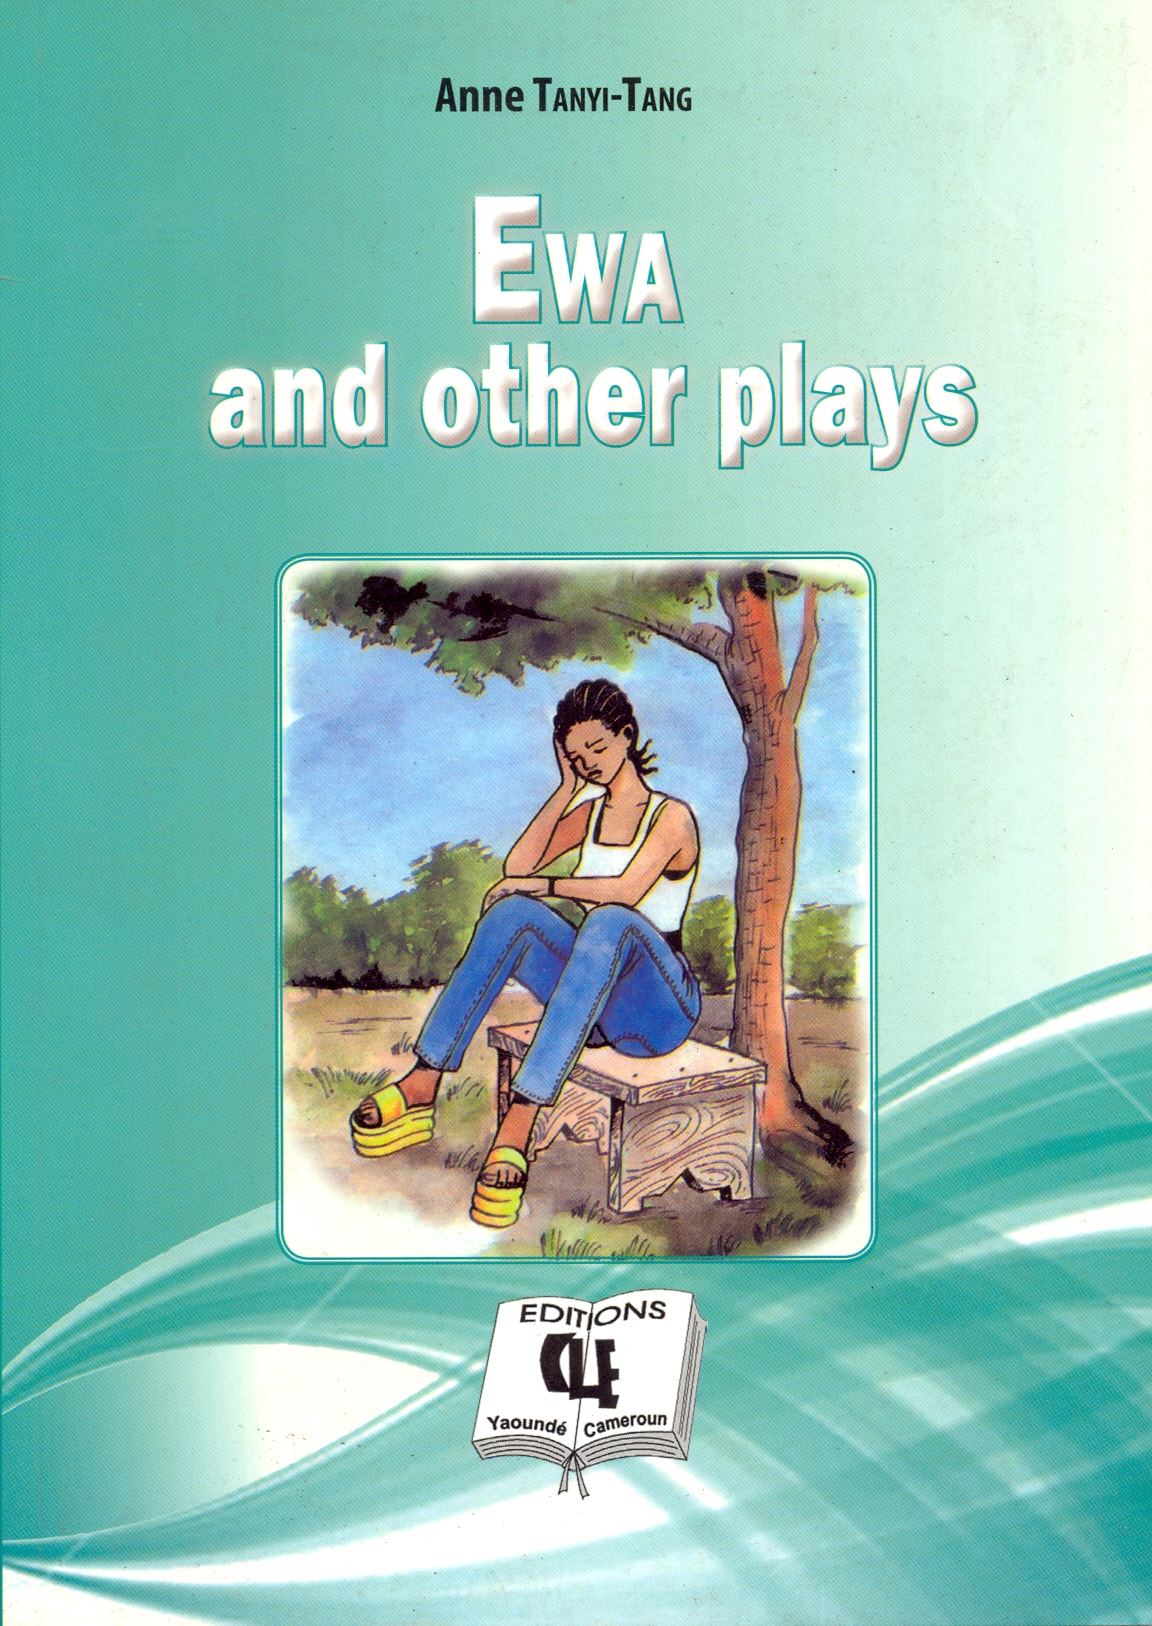 Ewa and other plays